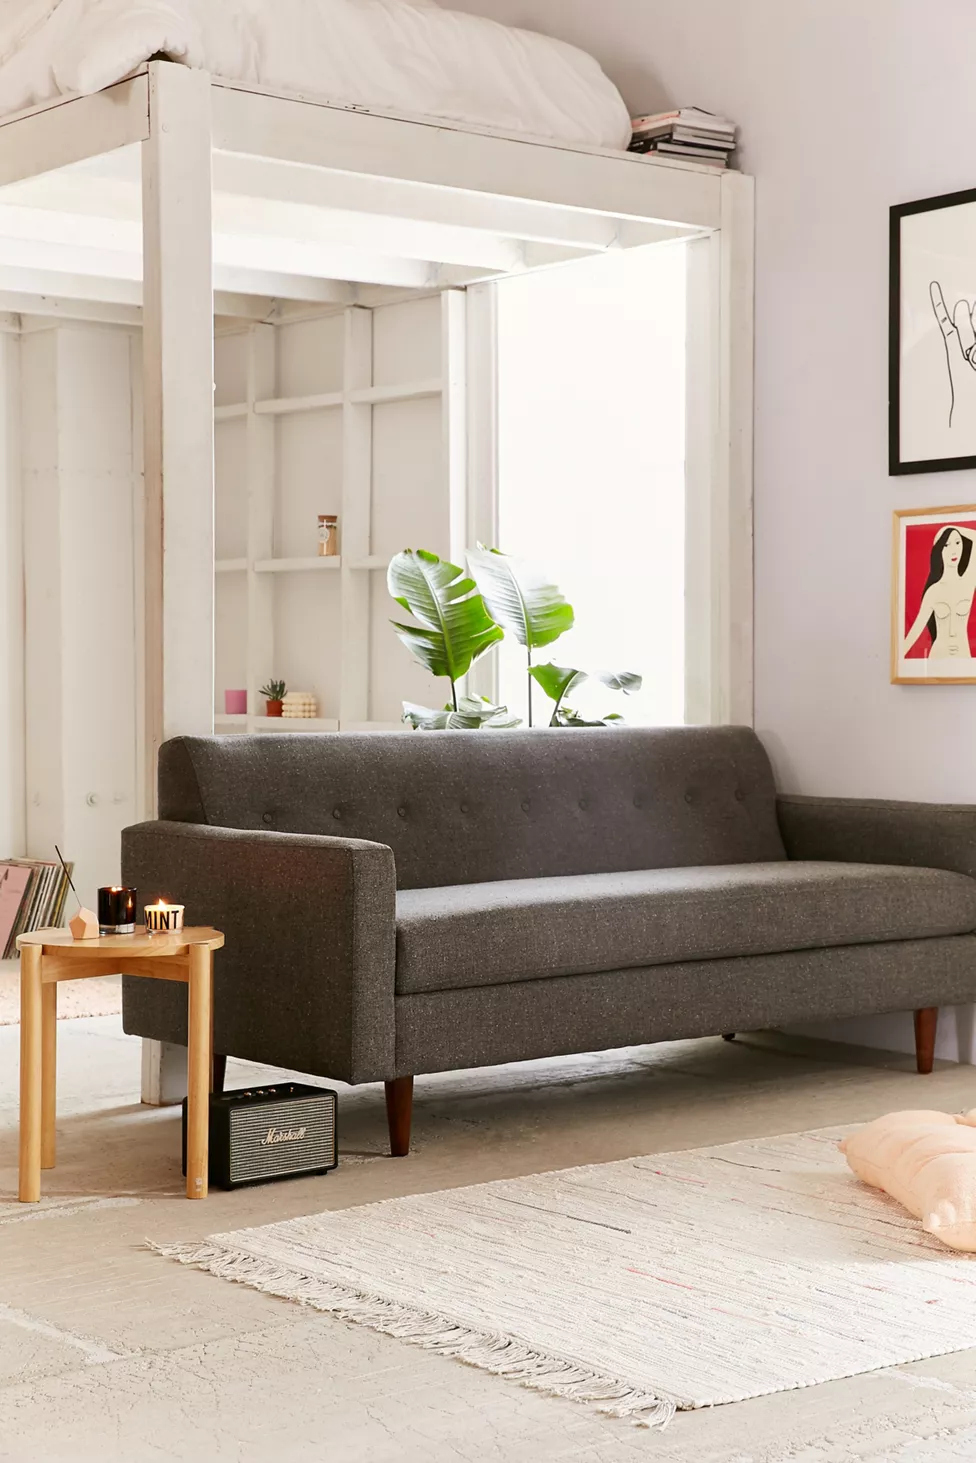 Outfit a Smaller Living Room with this Minimal Gray Sofa